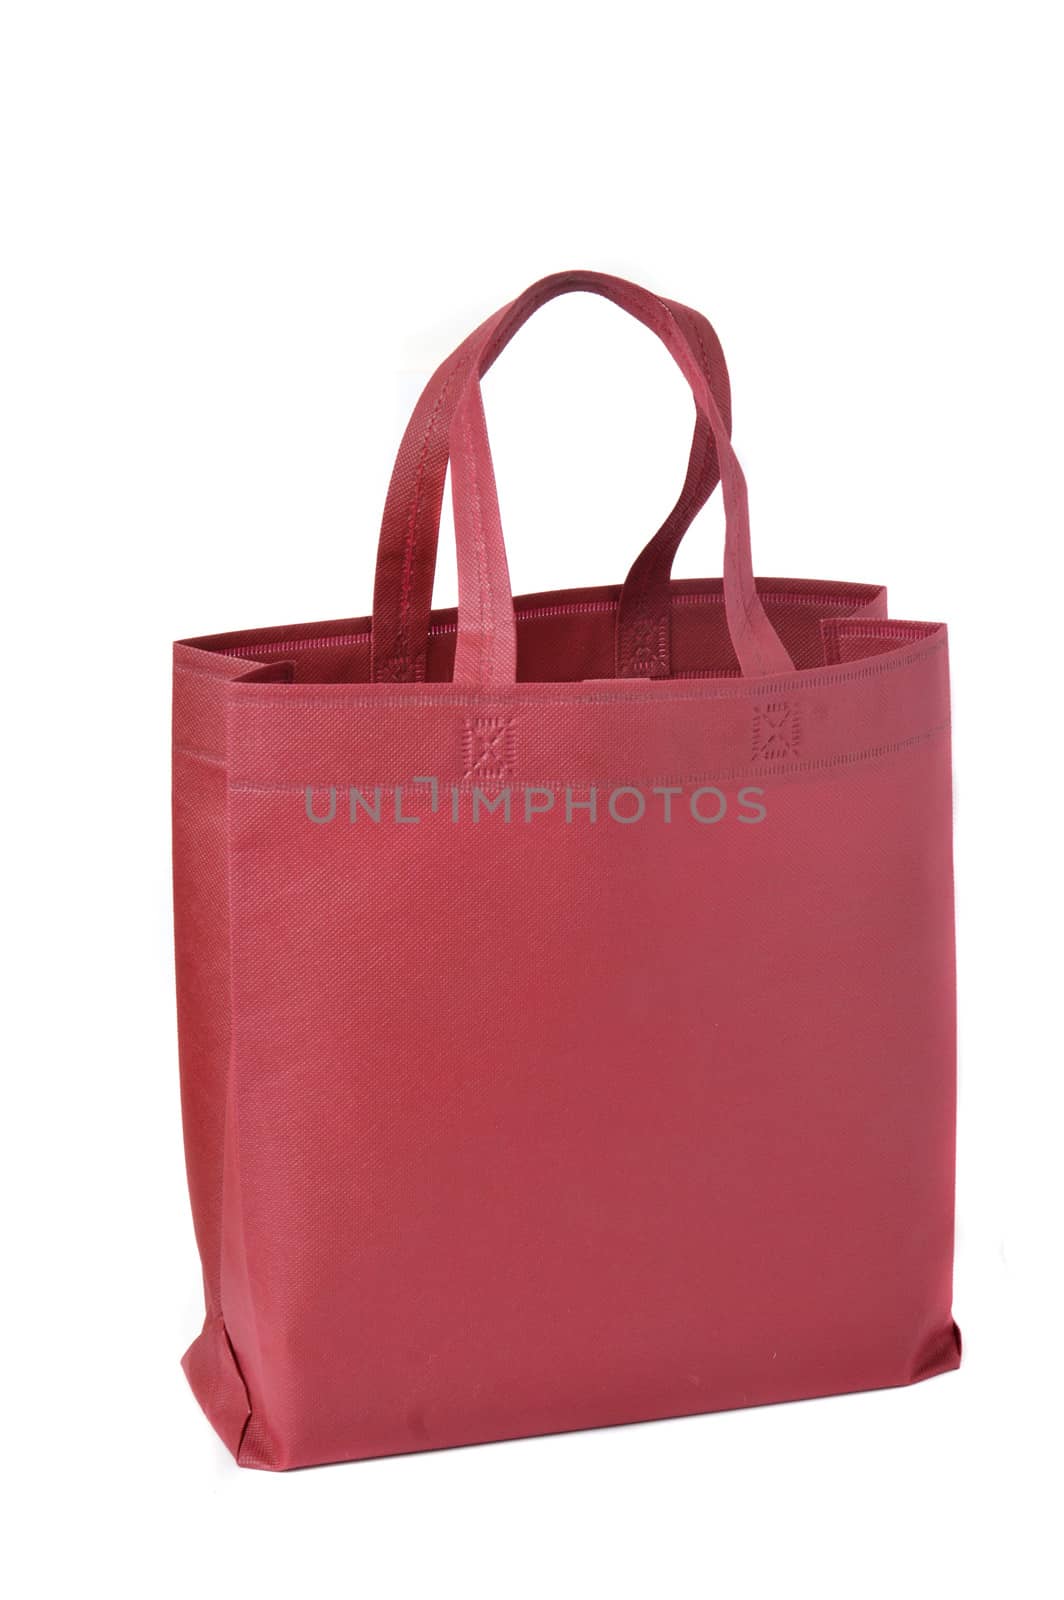 red cloth bag on white background